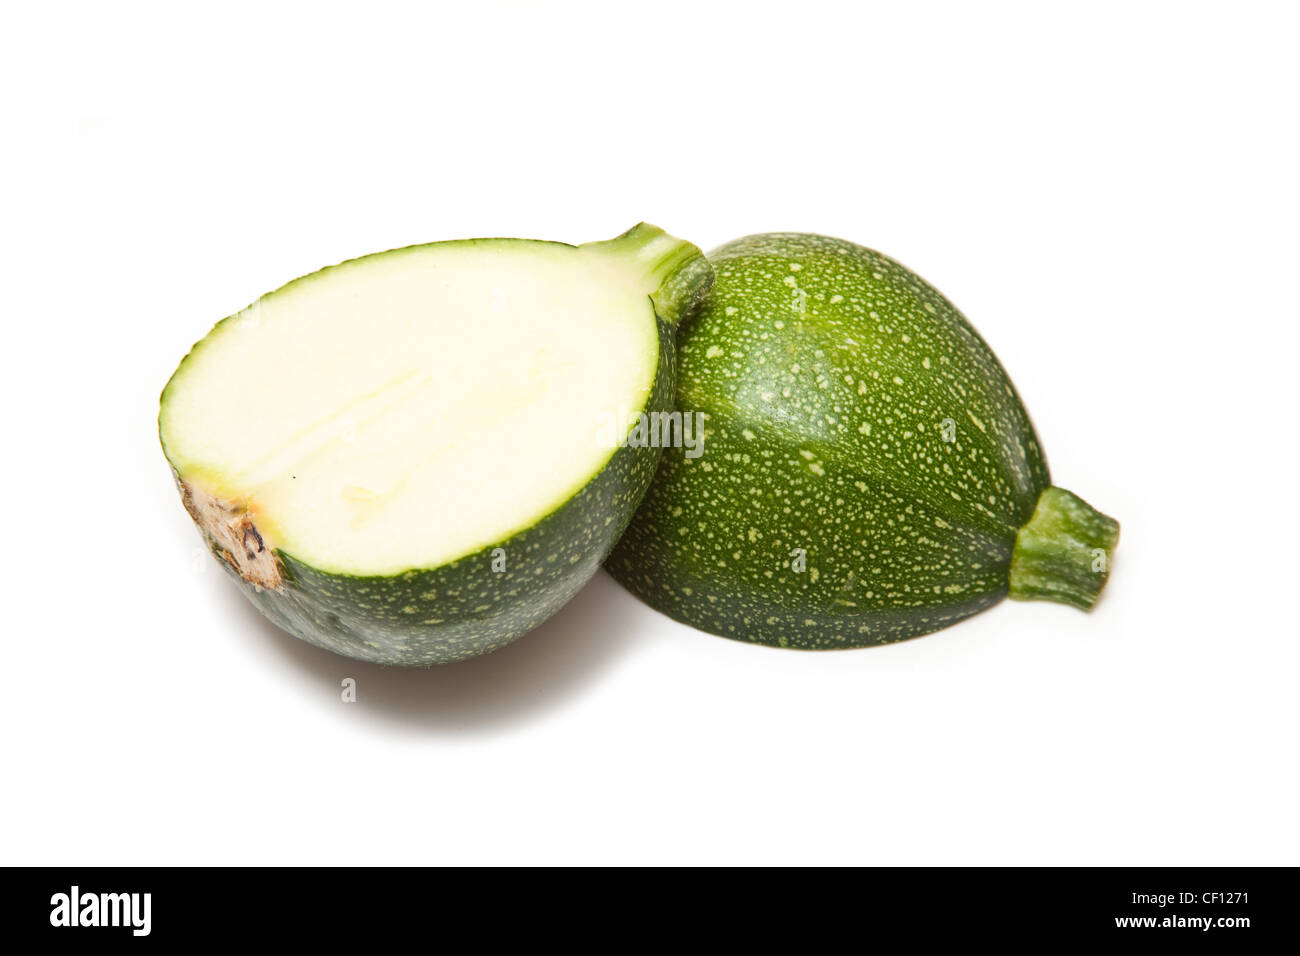 Globe courgette isolated on a white studio background. Stock Photo